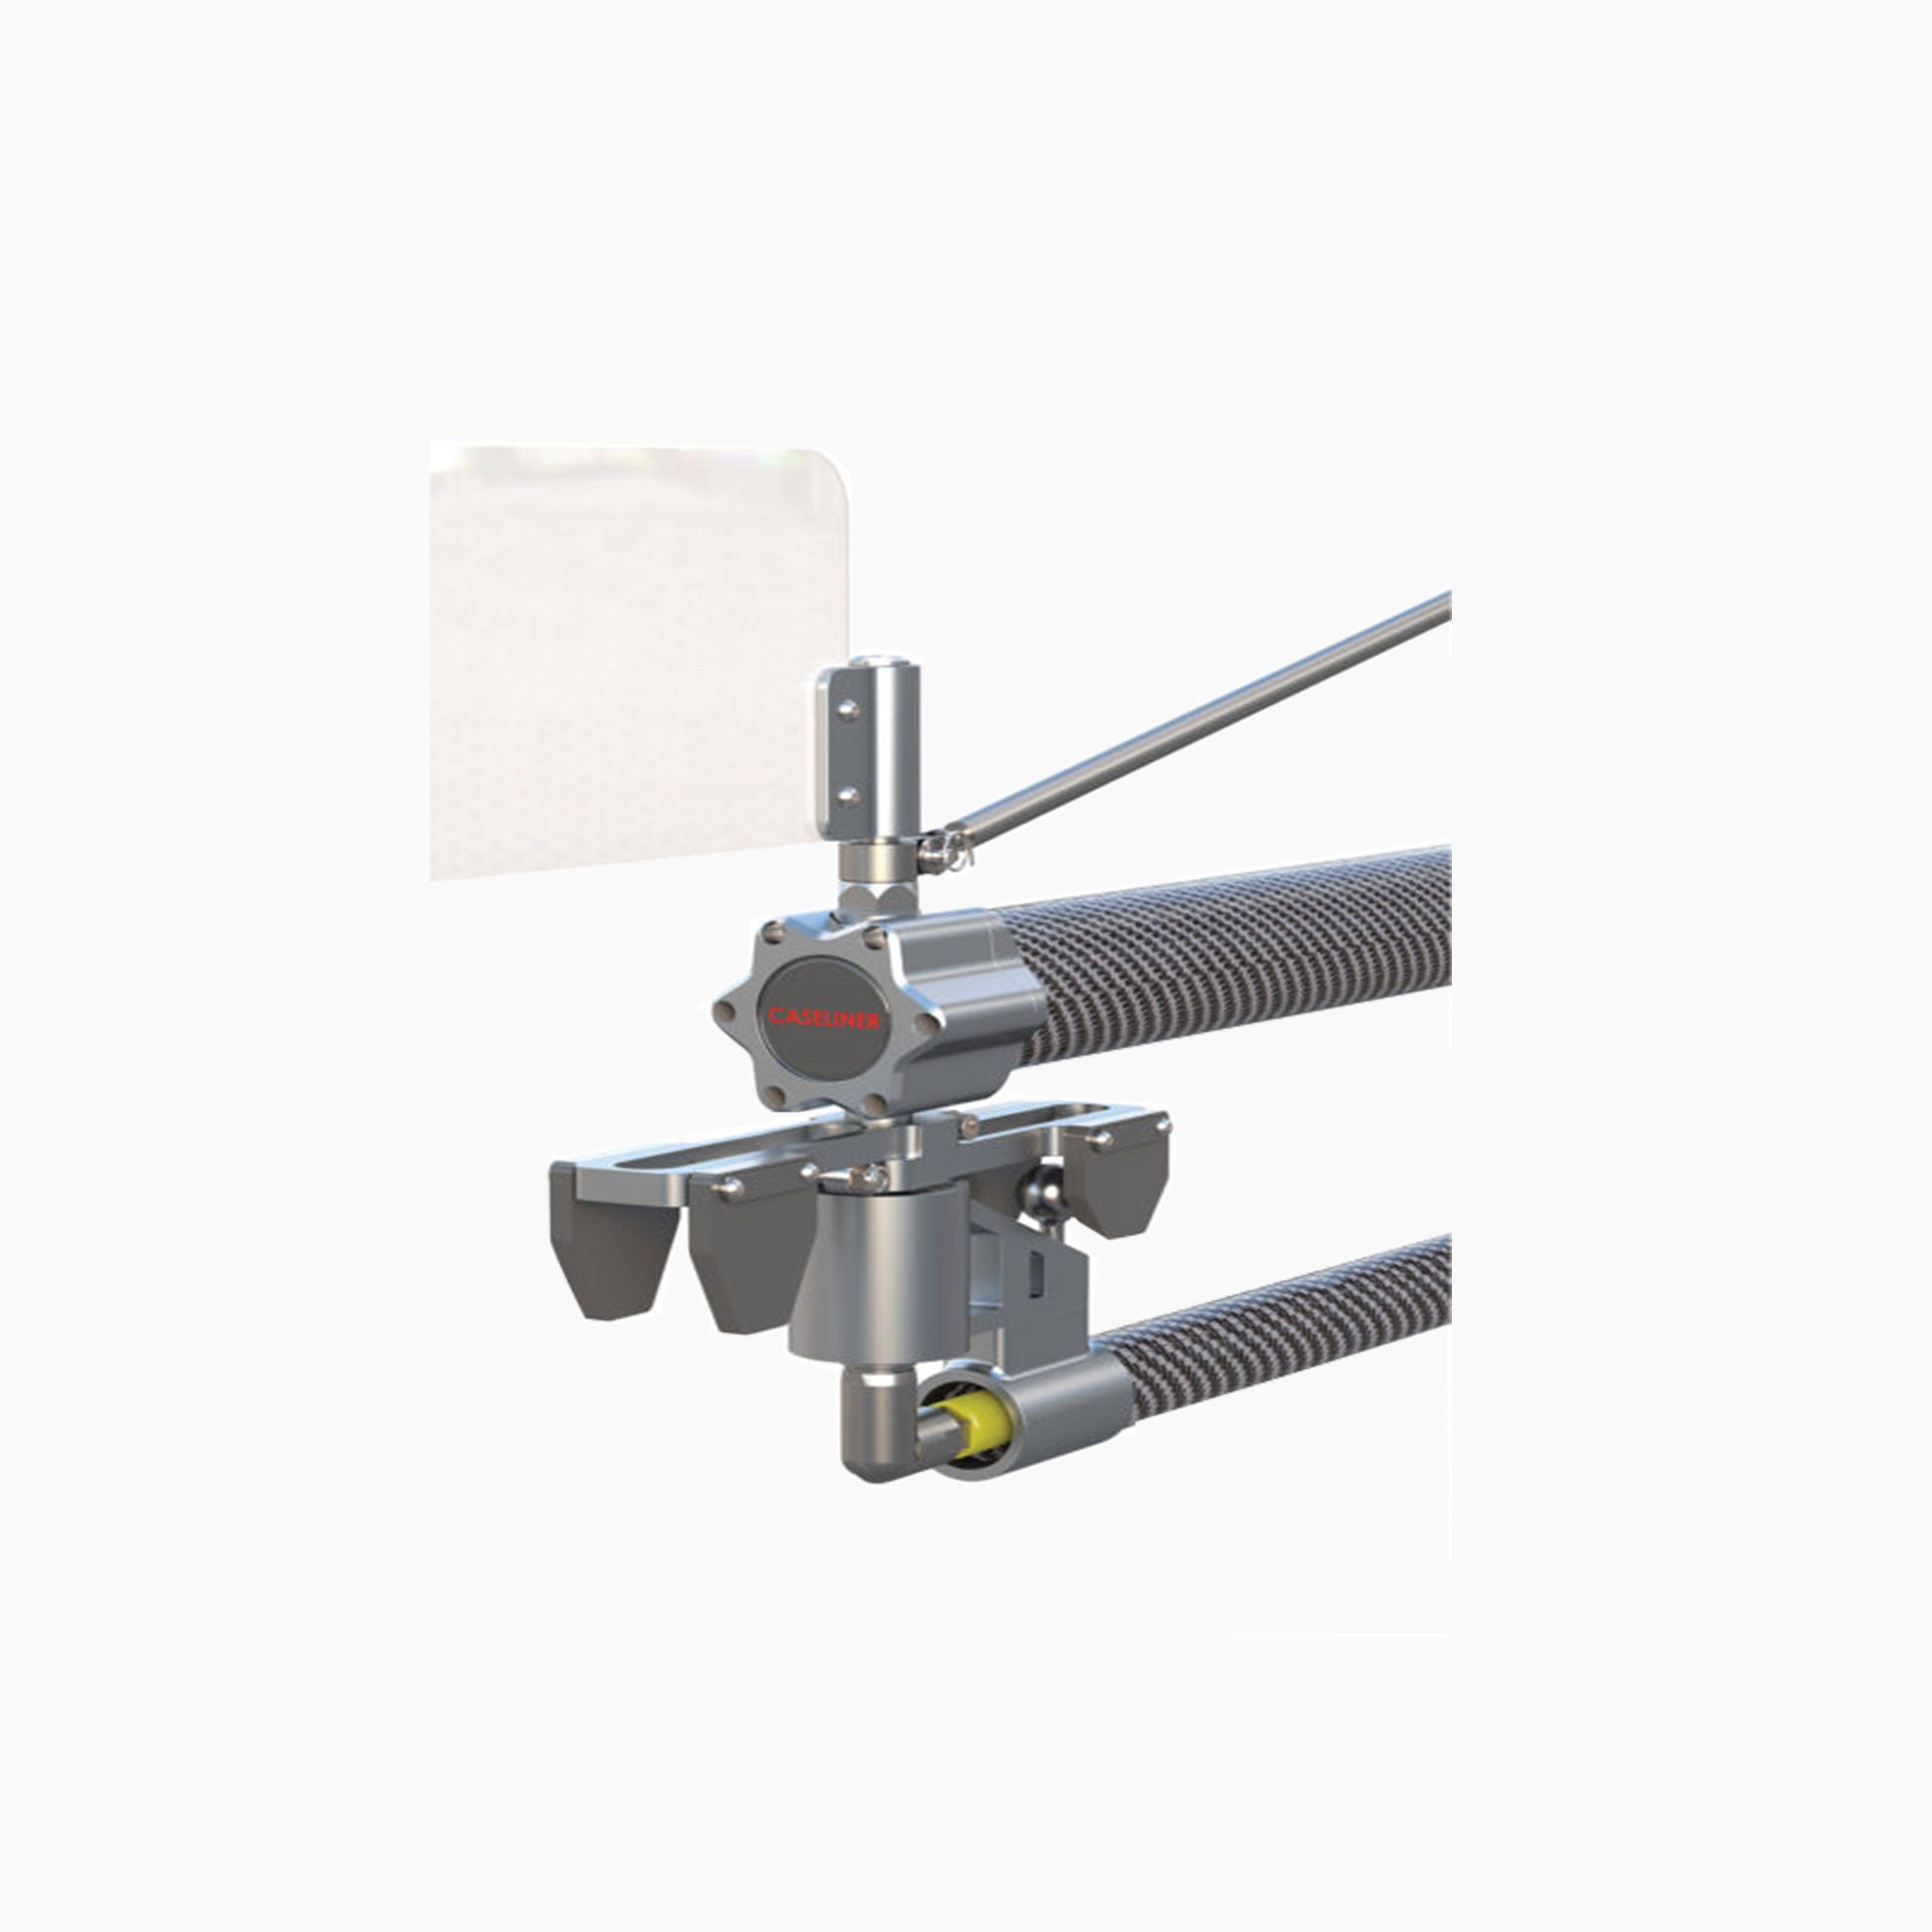 Caseliner | Rotary Boom Carbon CB200-Rotary Boom-Caseliner-gpx-store